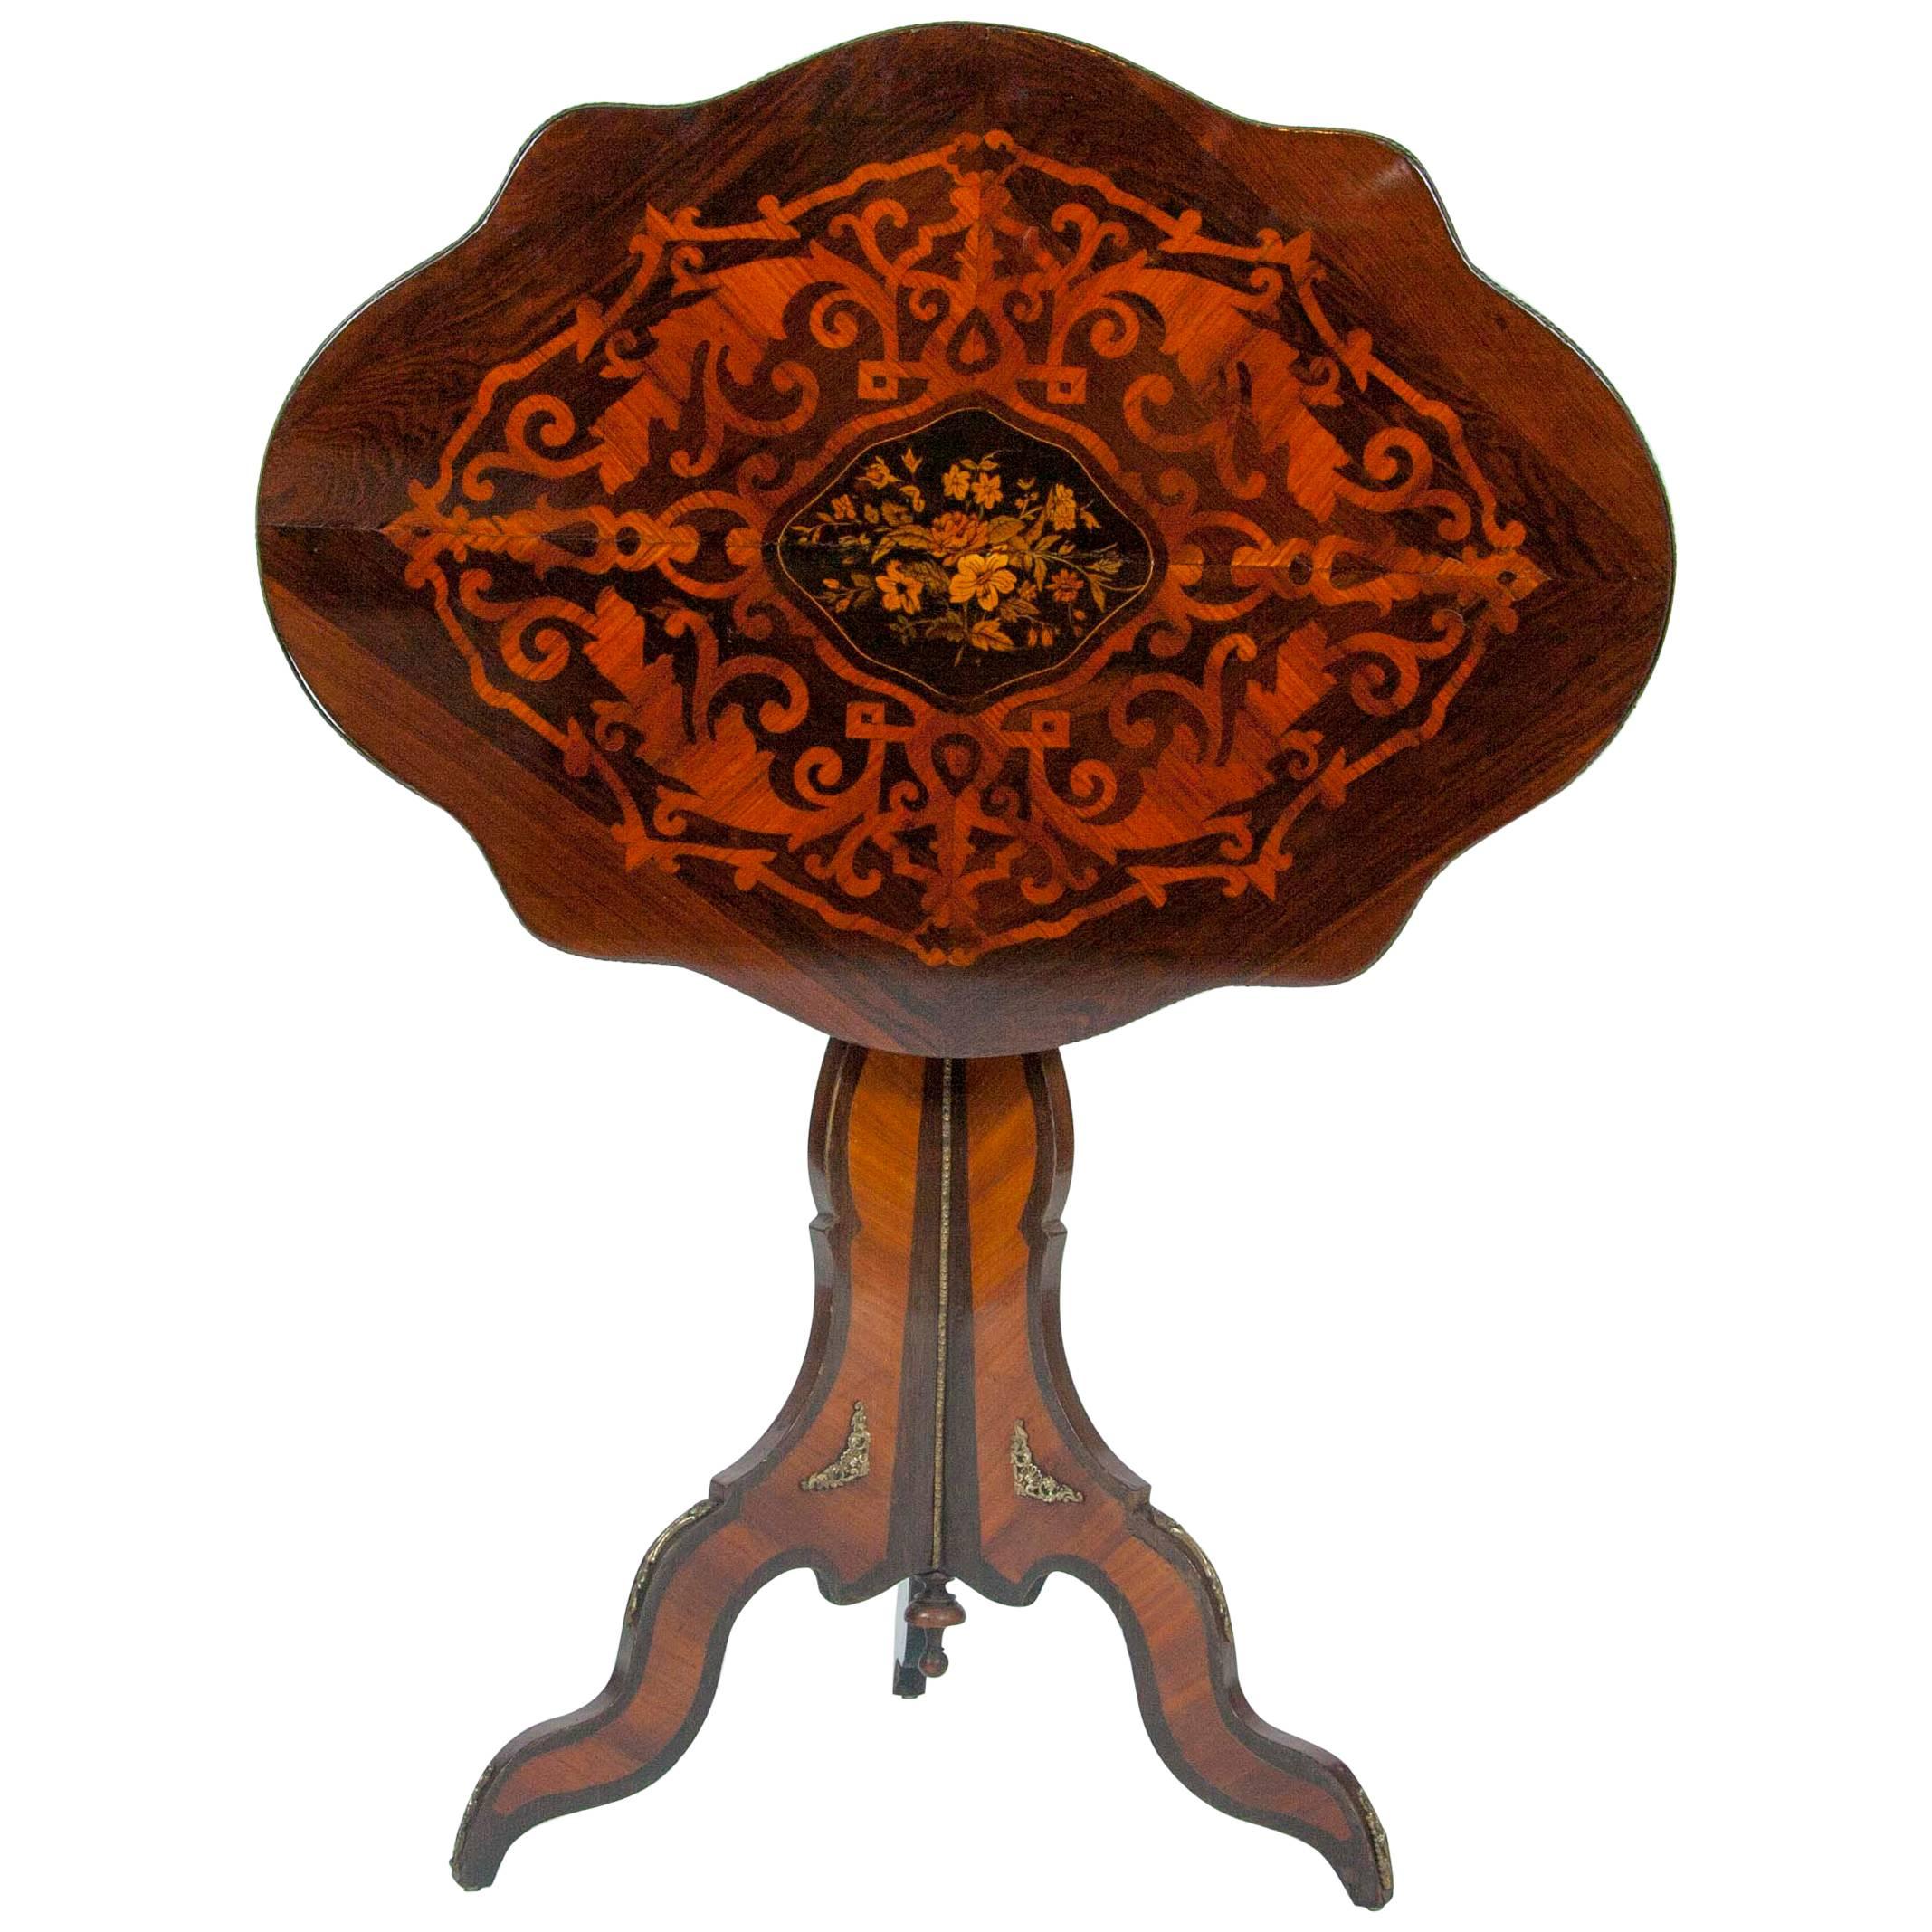 French Napoleon III Period Inlaid Tilt Top Table